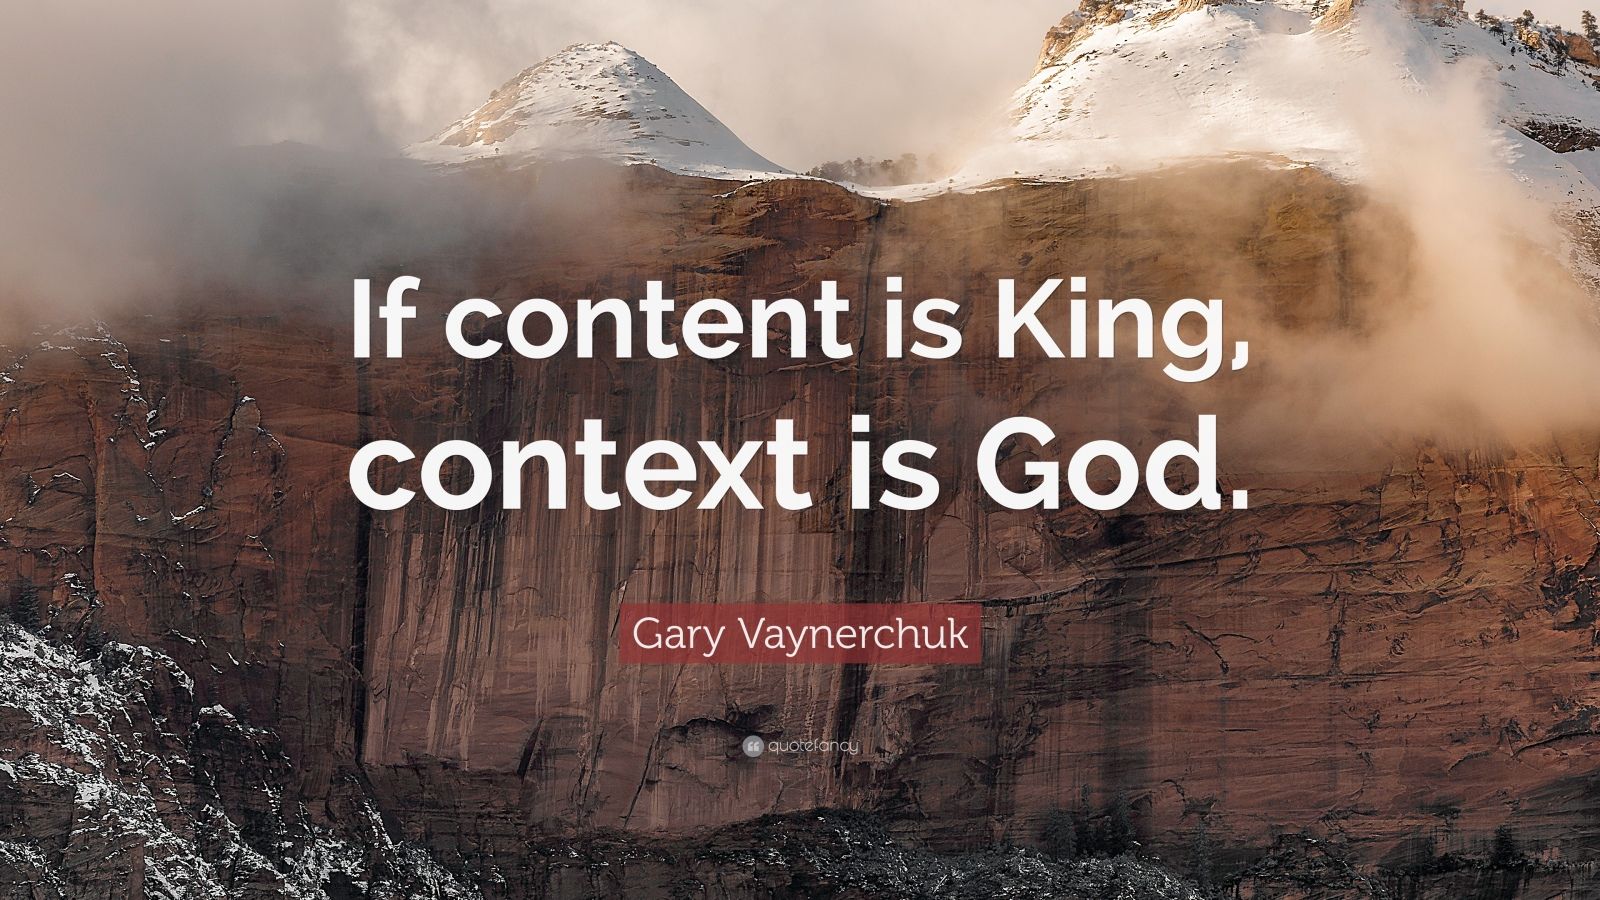 Gary Vaynerchuk Quote: "If content is King, context is God." (12 wallpapers) - Quotefancy